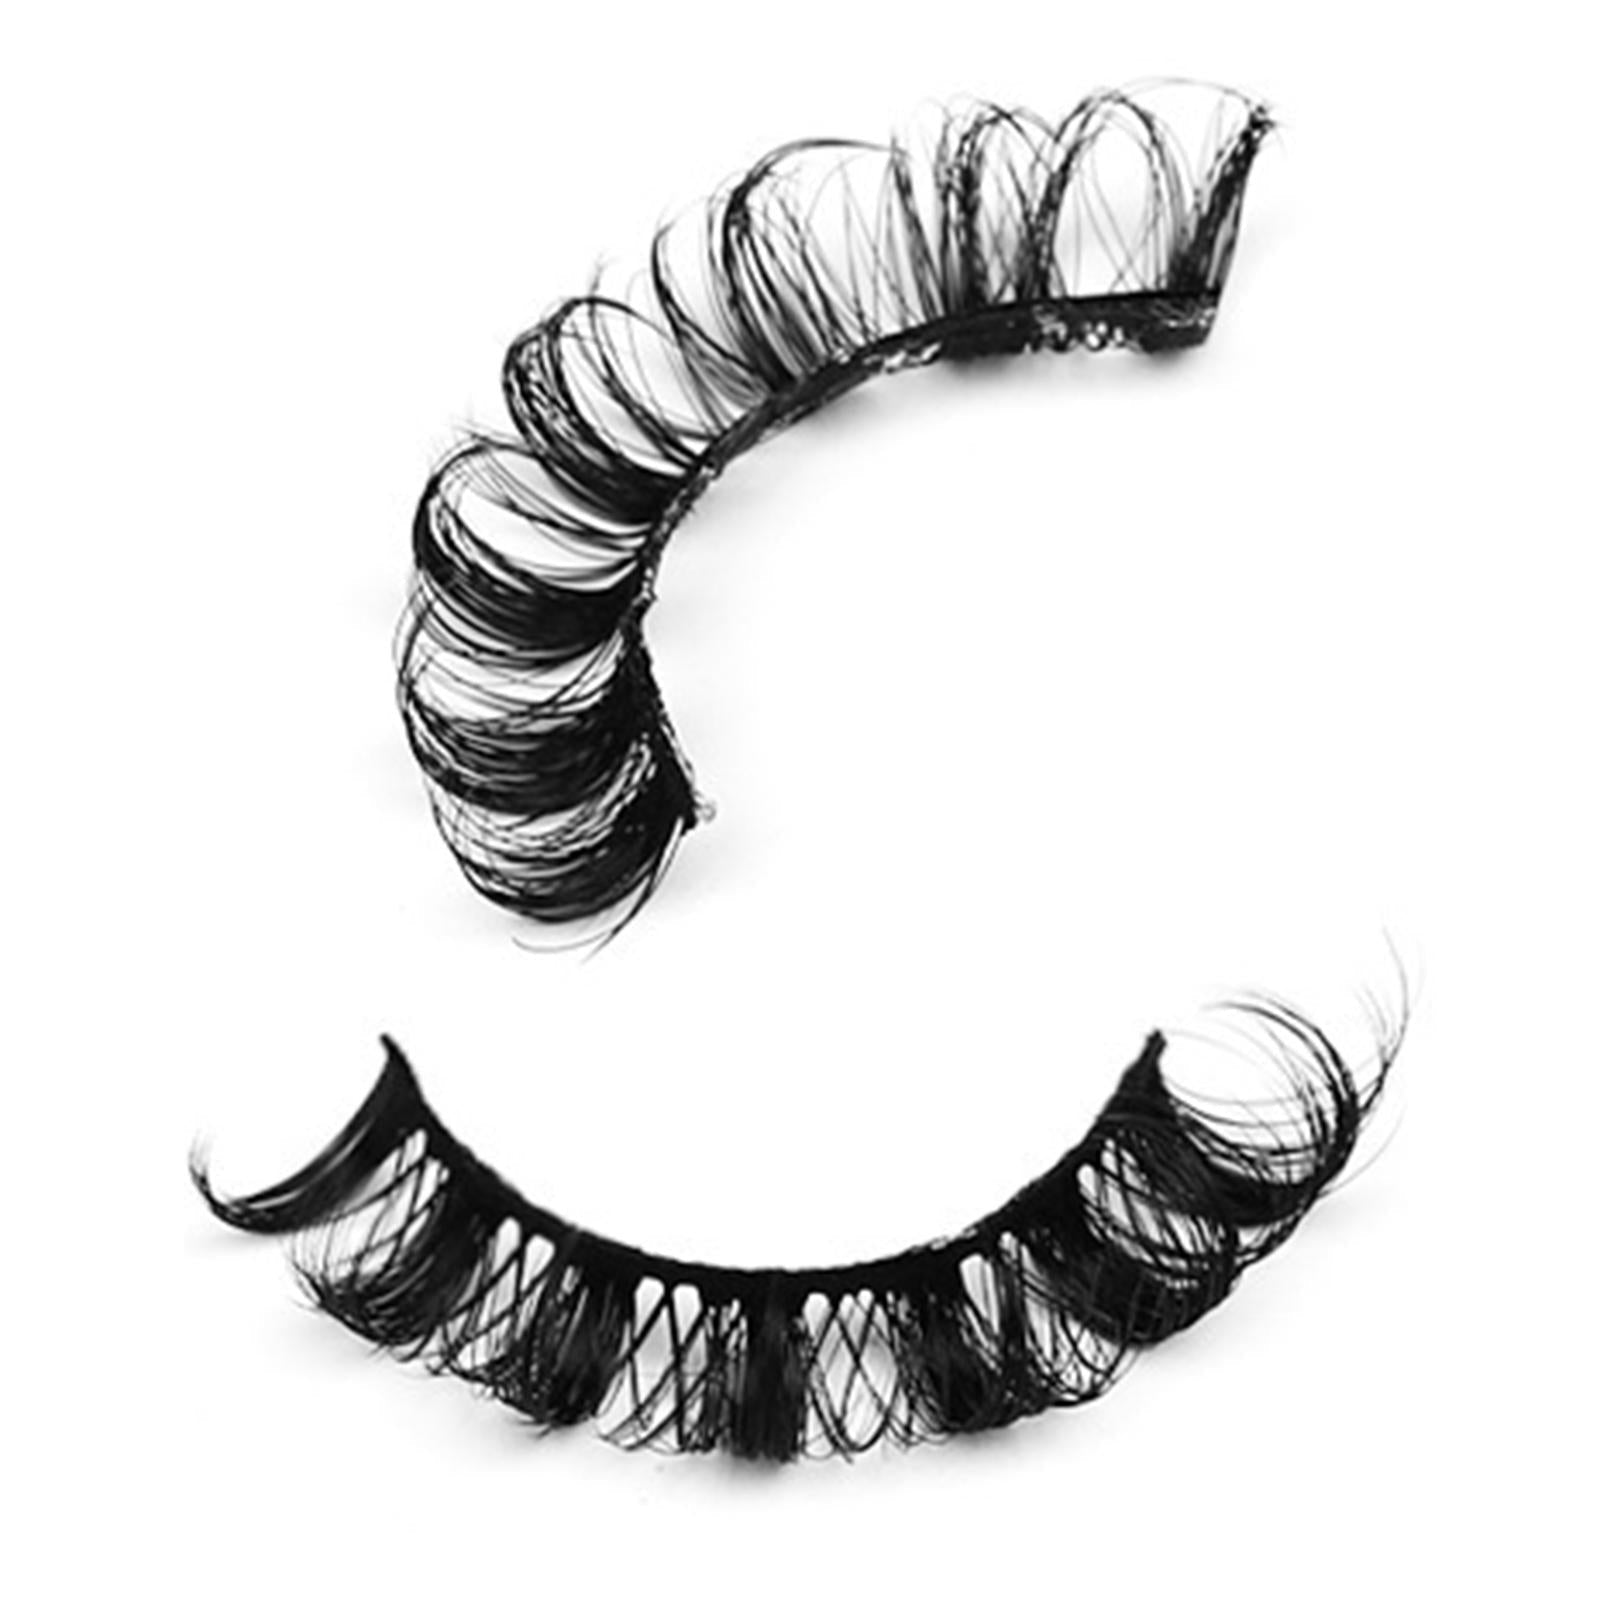 10 Pairs Russian Strip Lashes DD Curl Curly Eye Lashes Handmade C